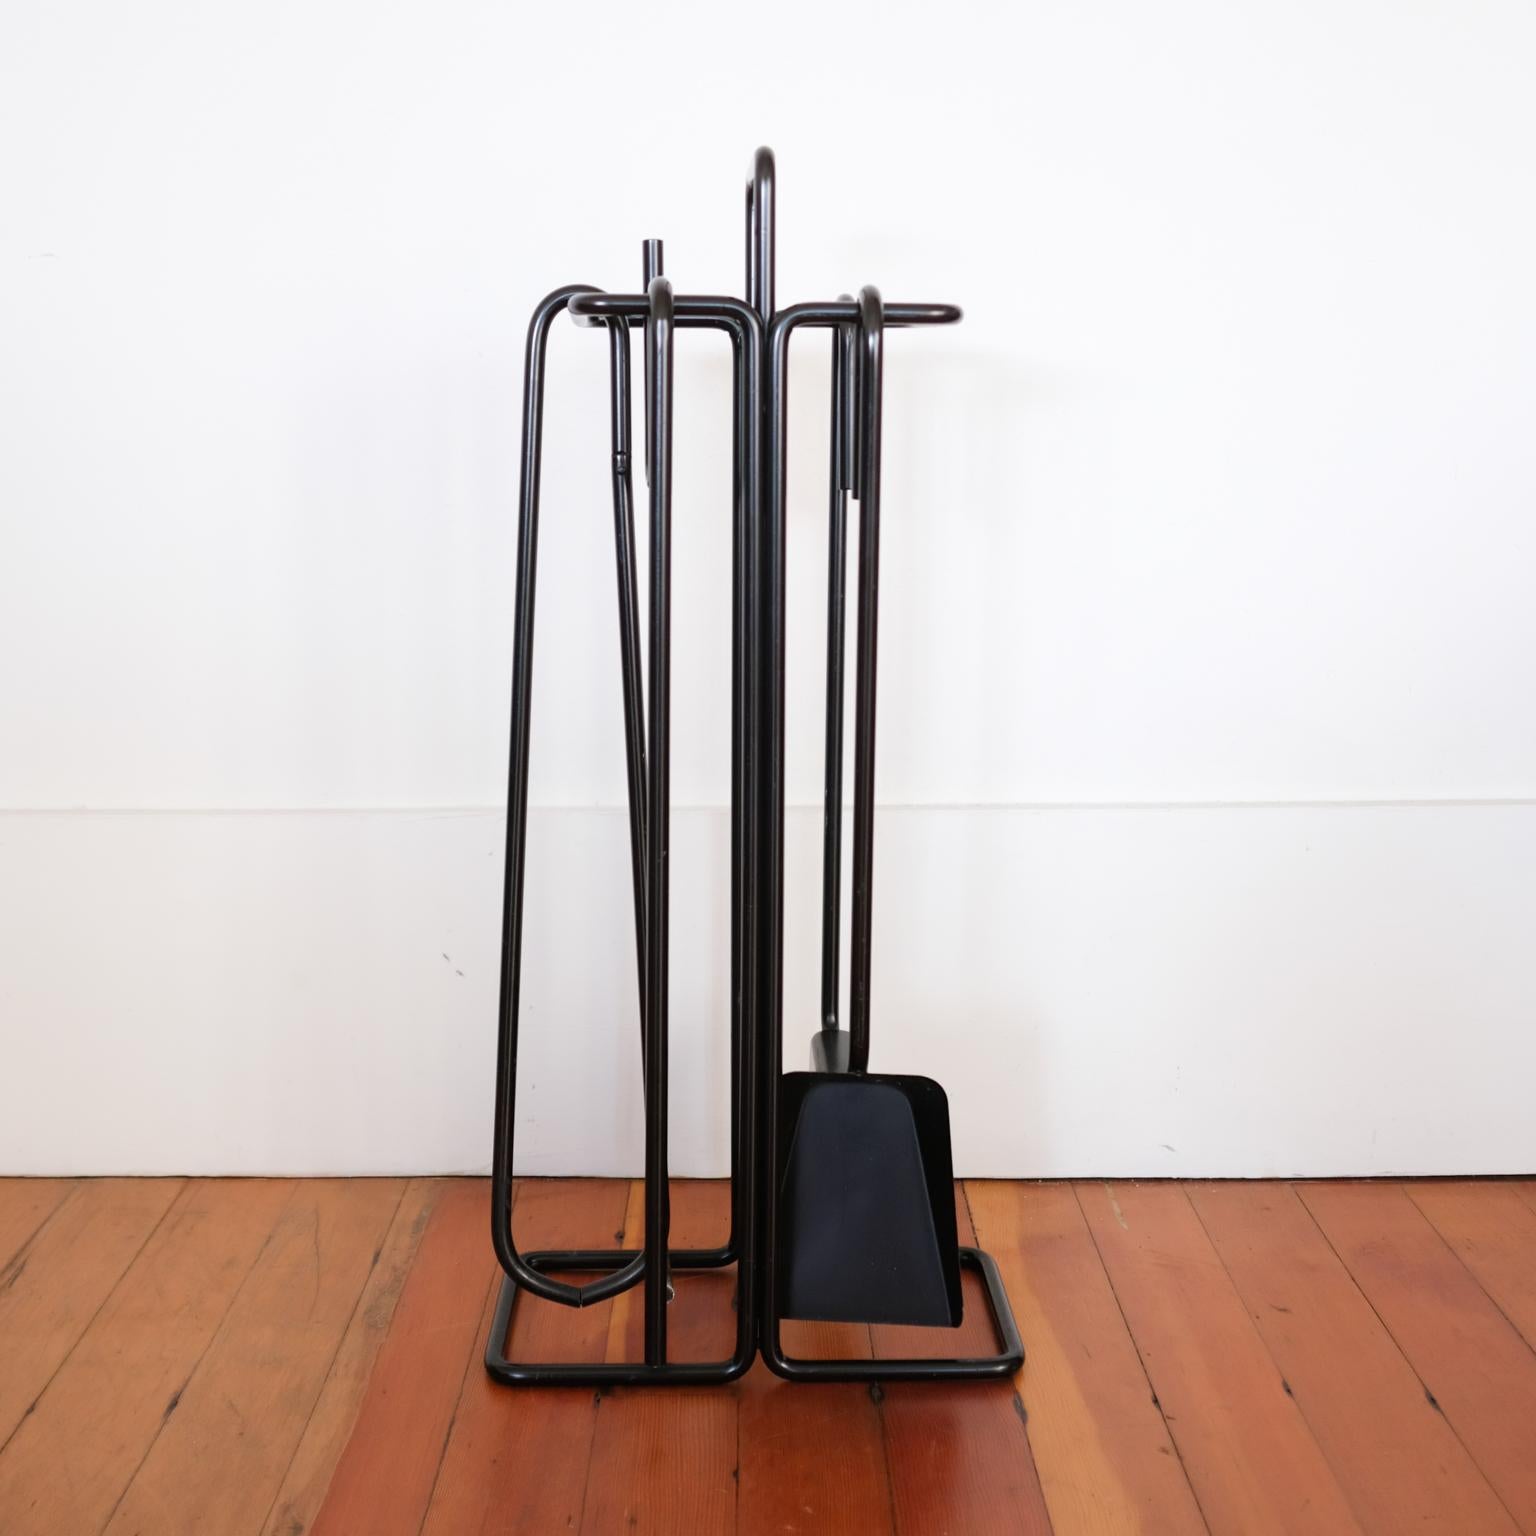 Set of iron fire tools hung on a sculptural iron stand. A striking and functional minimalist design. The set, called Mace-Line, was designed by Ann Maes, an American, and made in the Netherlands. 1970s.